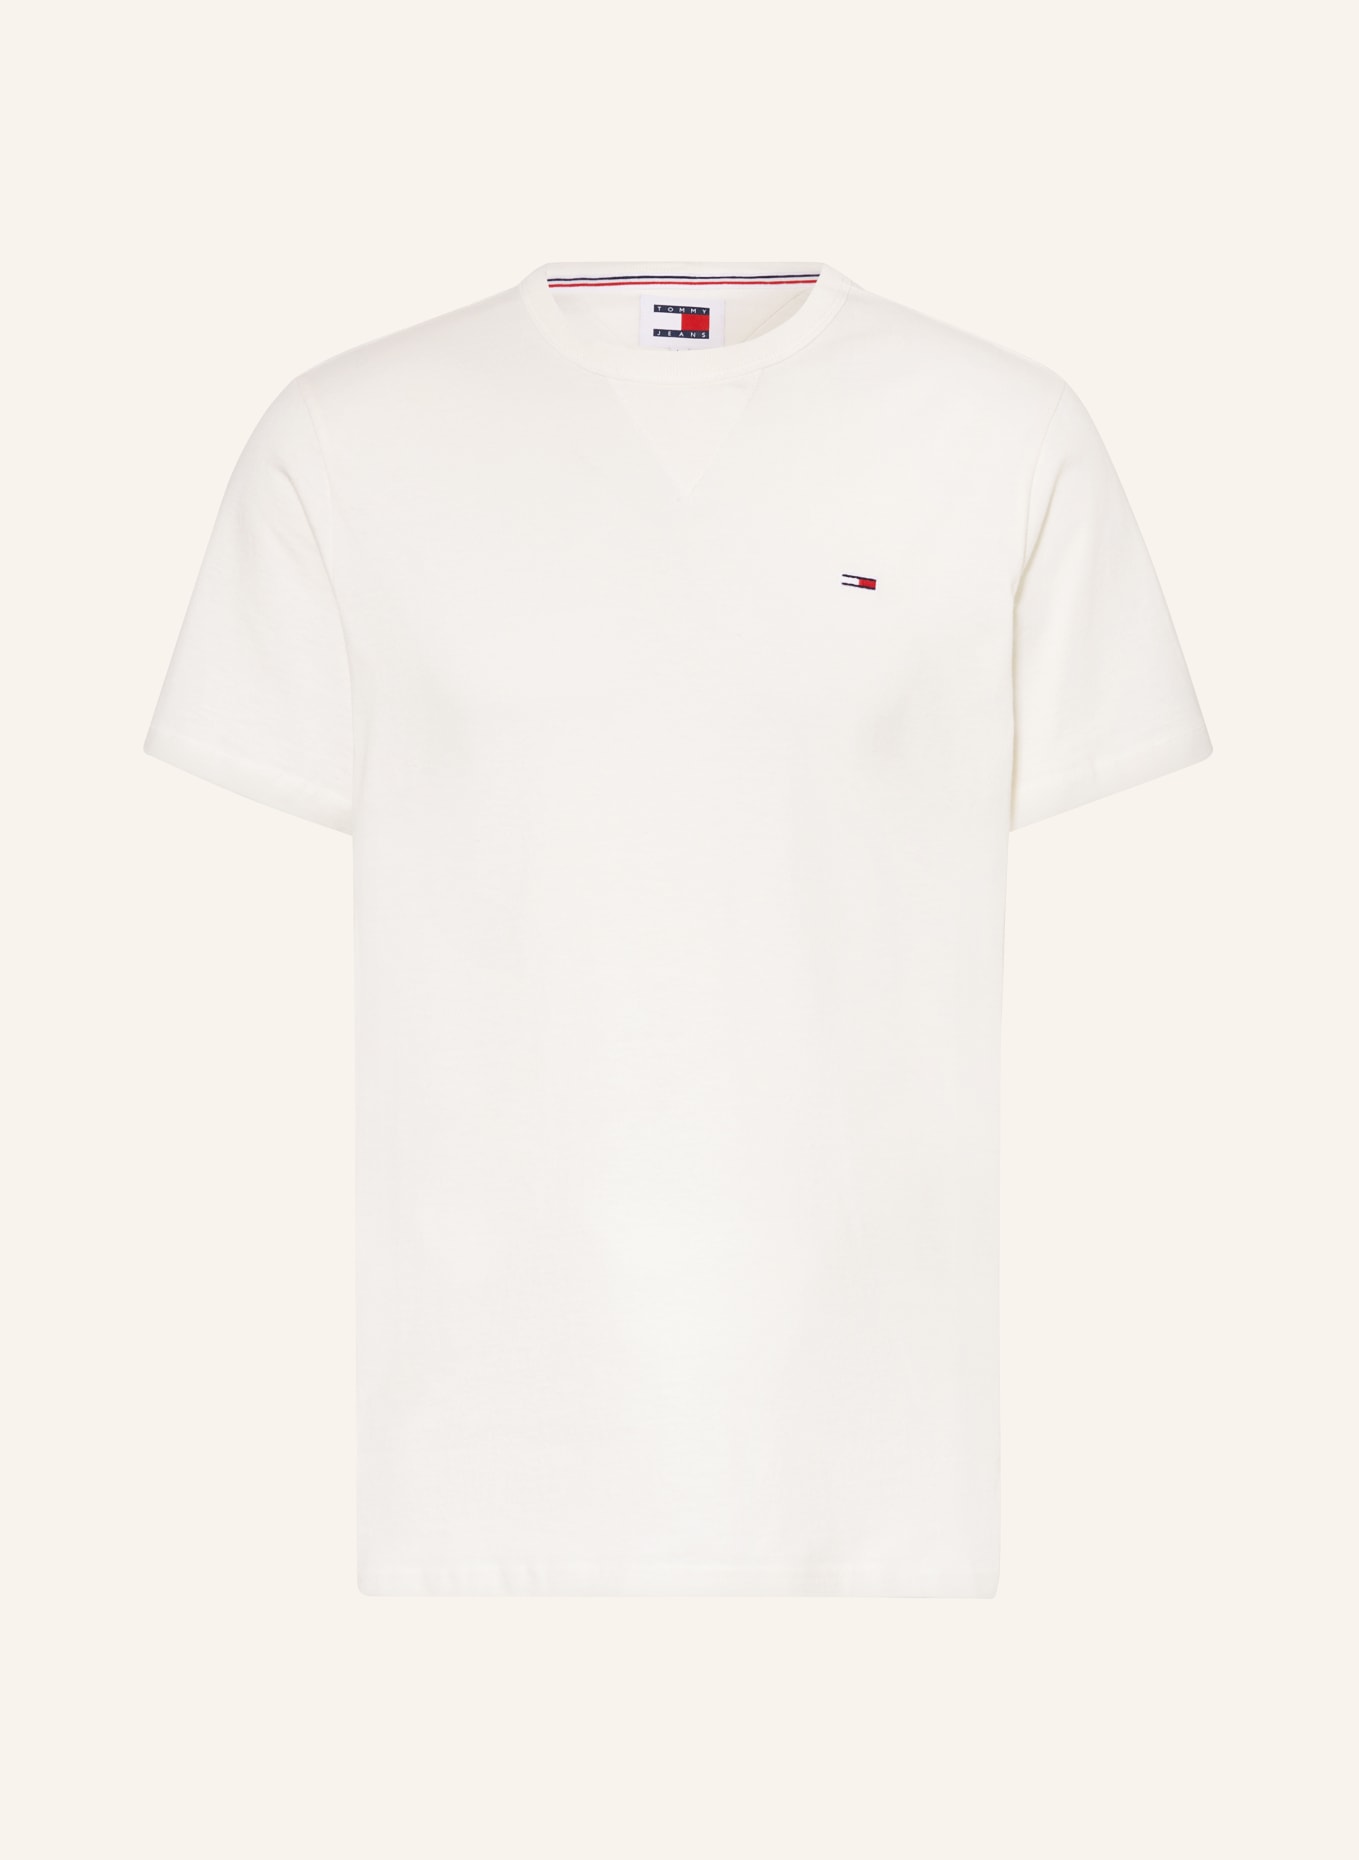 TOMMY JEANS T-Shirt, Farbe: CREME (Bild 1)